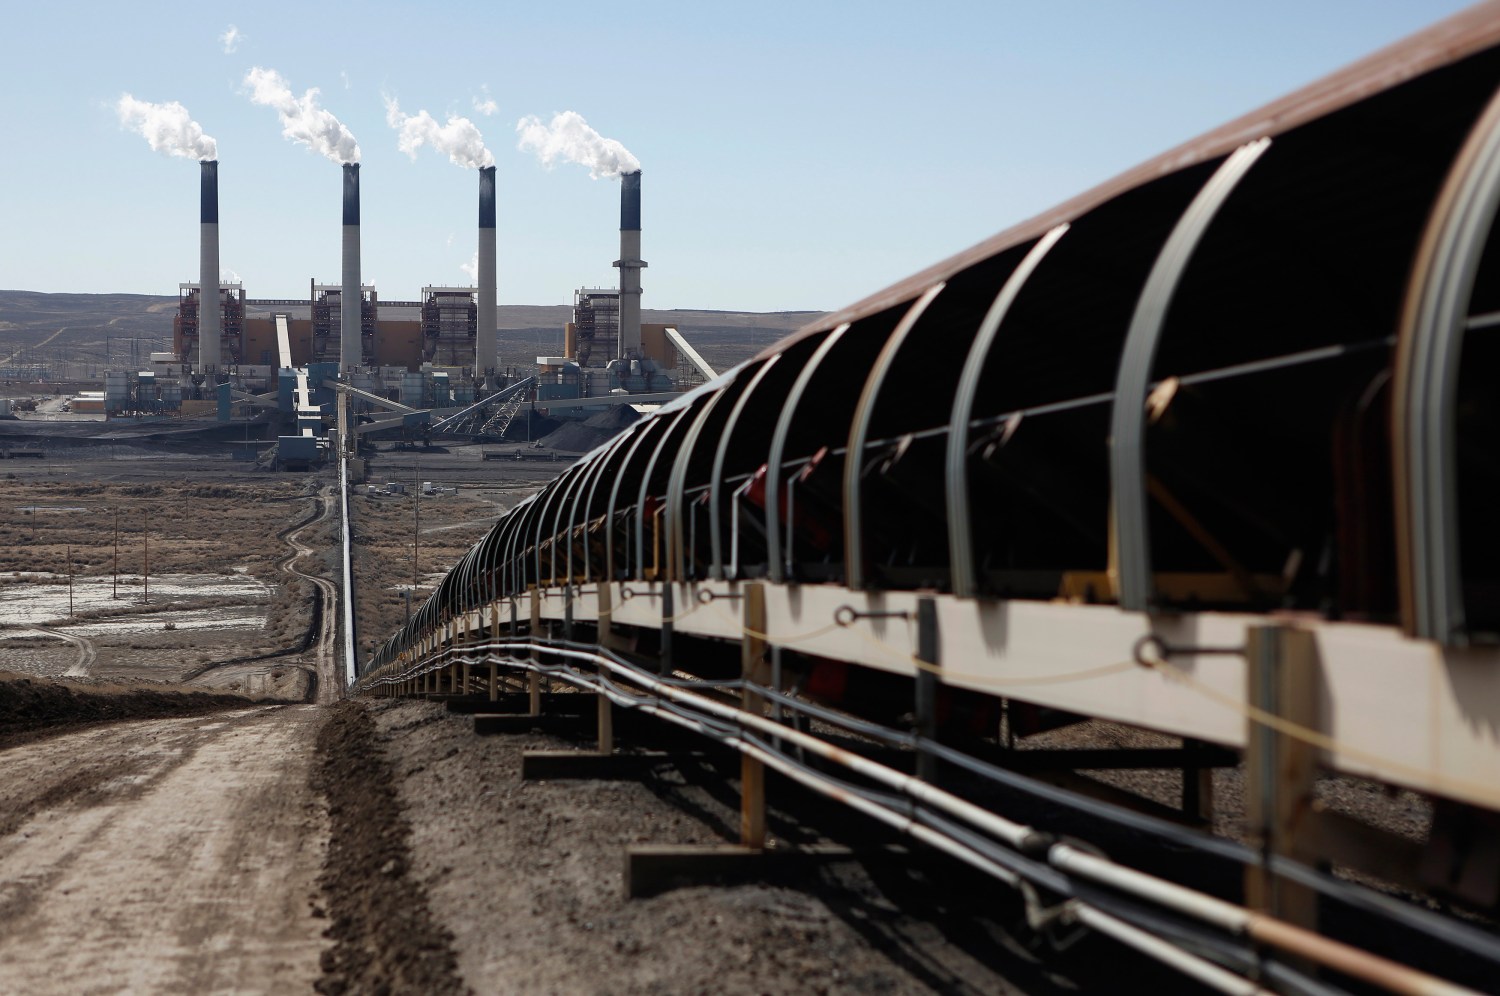 Coal is transported via conveyor belt to the coal-fired Jim Bridger Power Plant that supplied by the neighboring Jim Bridger mine that is owned by energy firm PacifiCorp and the Idaho Power Company, outside Point of the Rocks, Wyoming March 14, 2014.